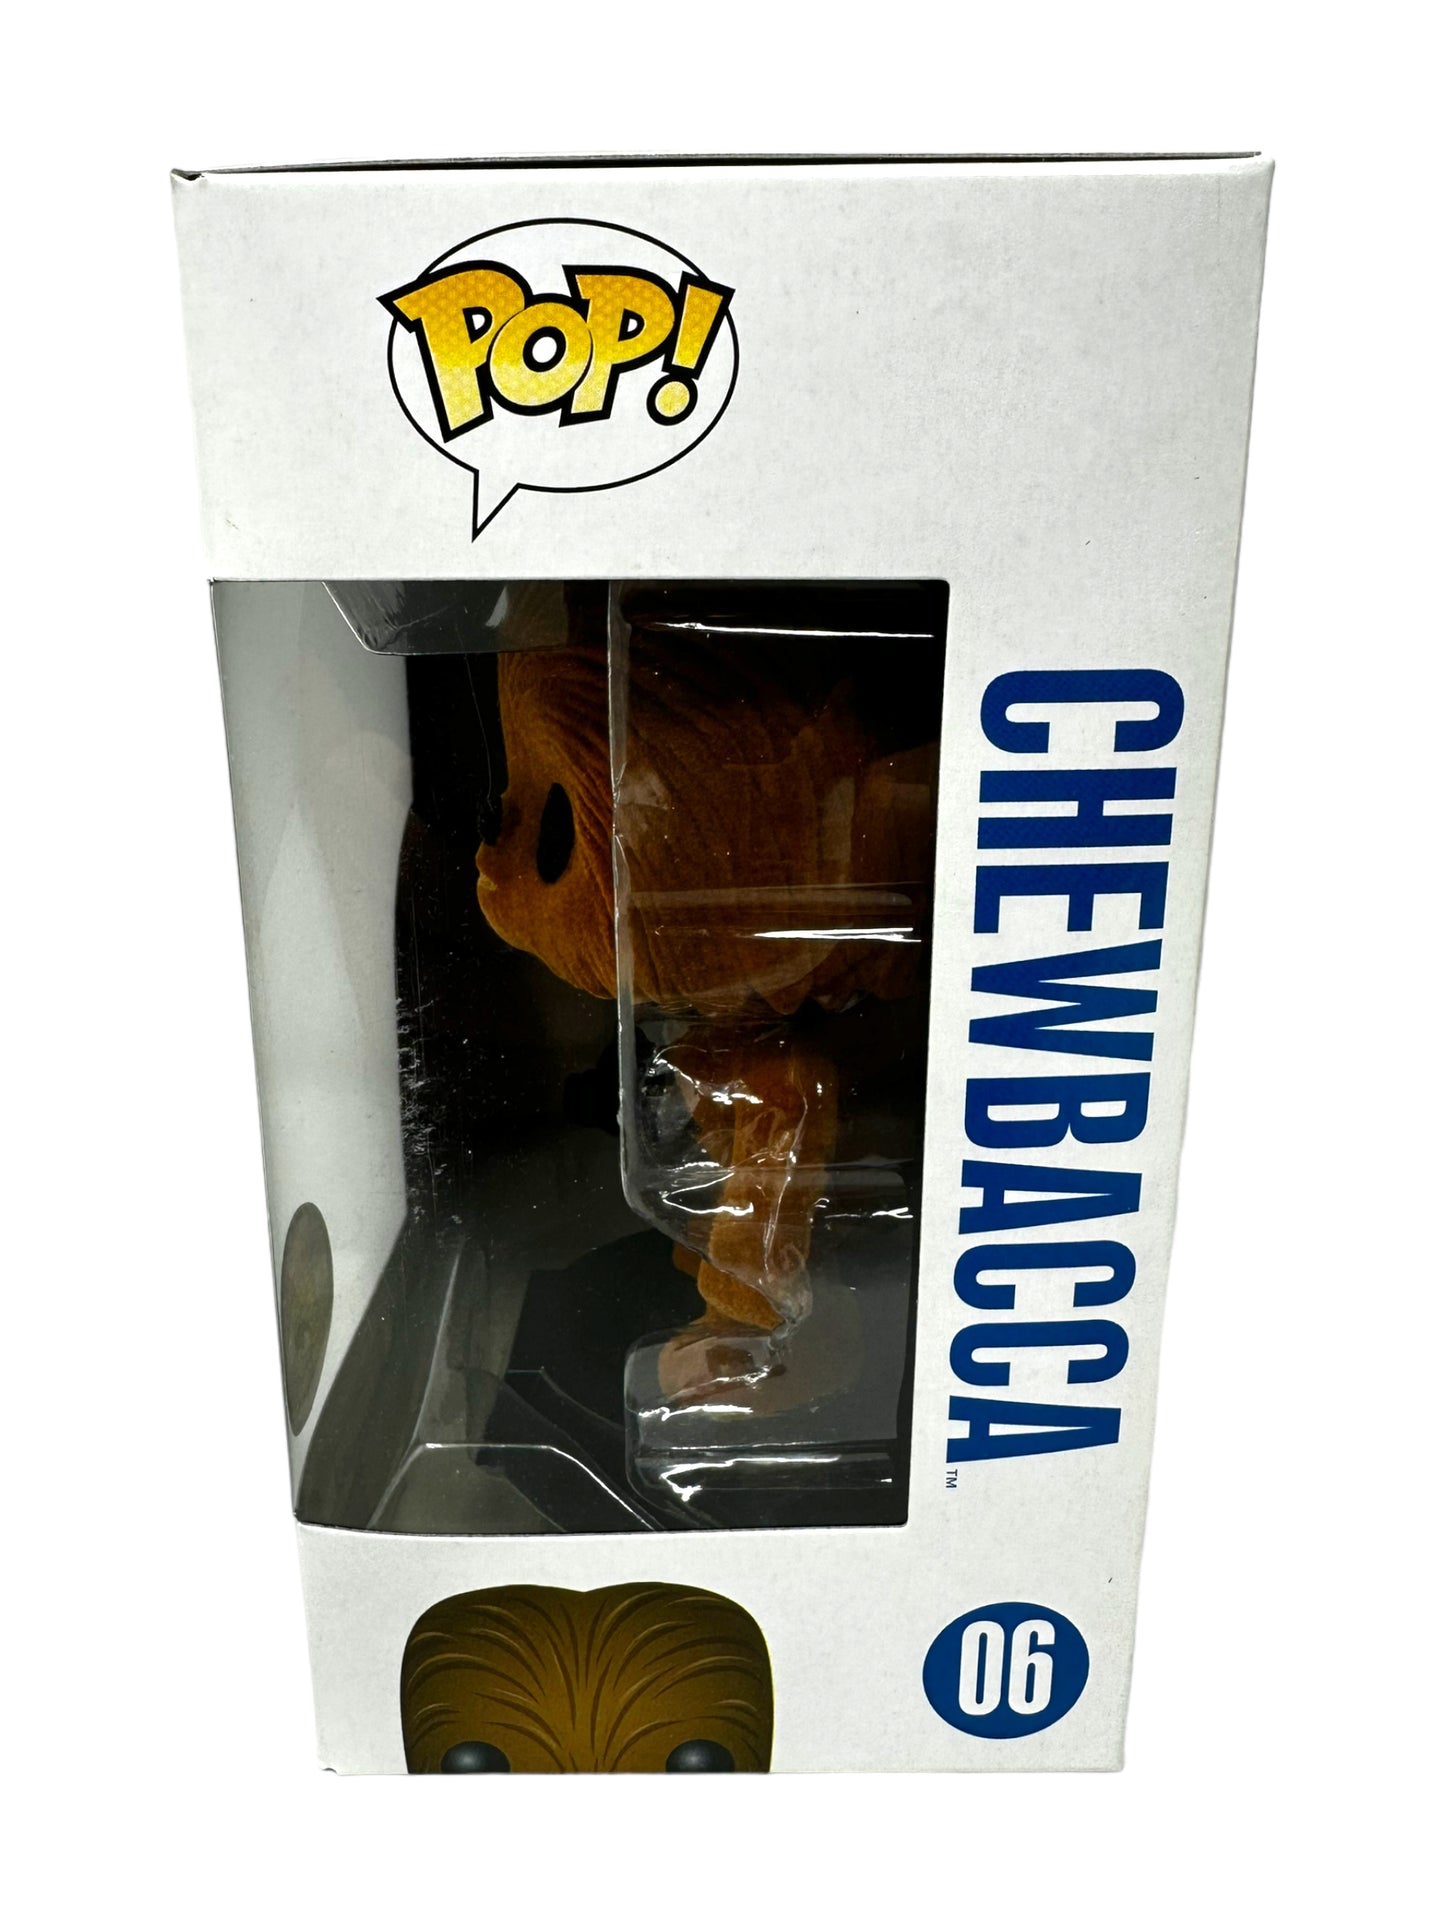 Sold 2011 SDCC Chewbacca (Flocked) 06 LE 480